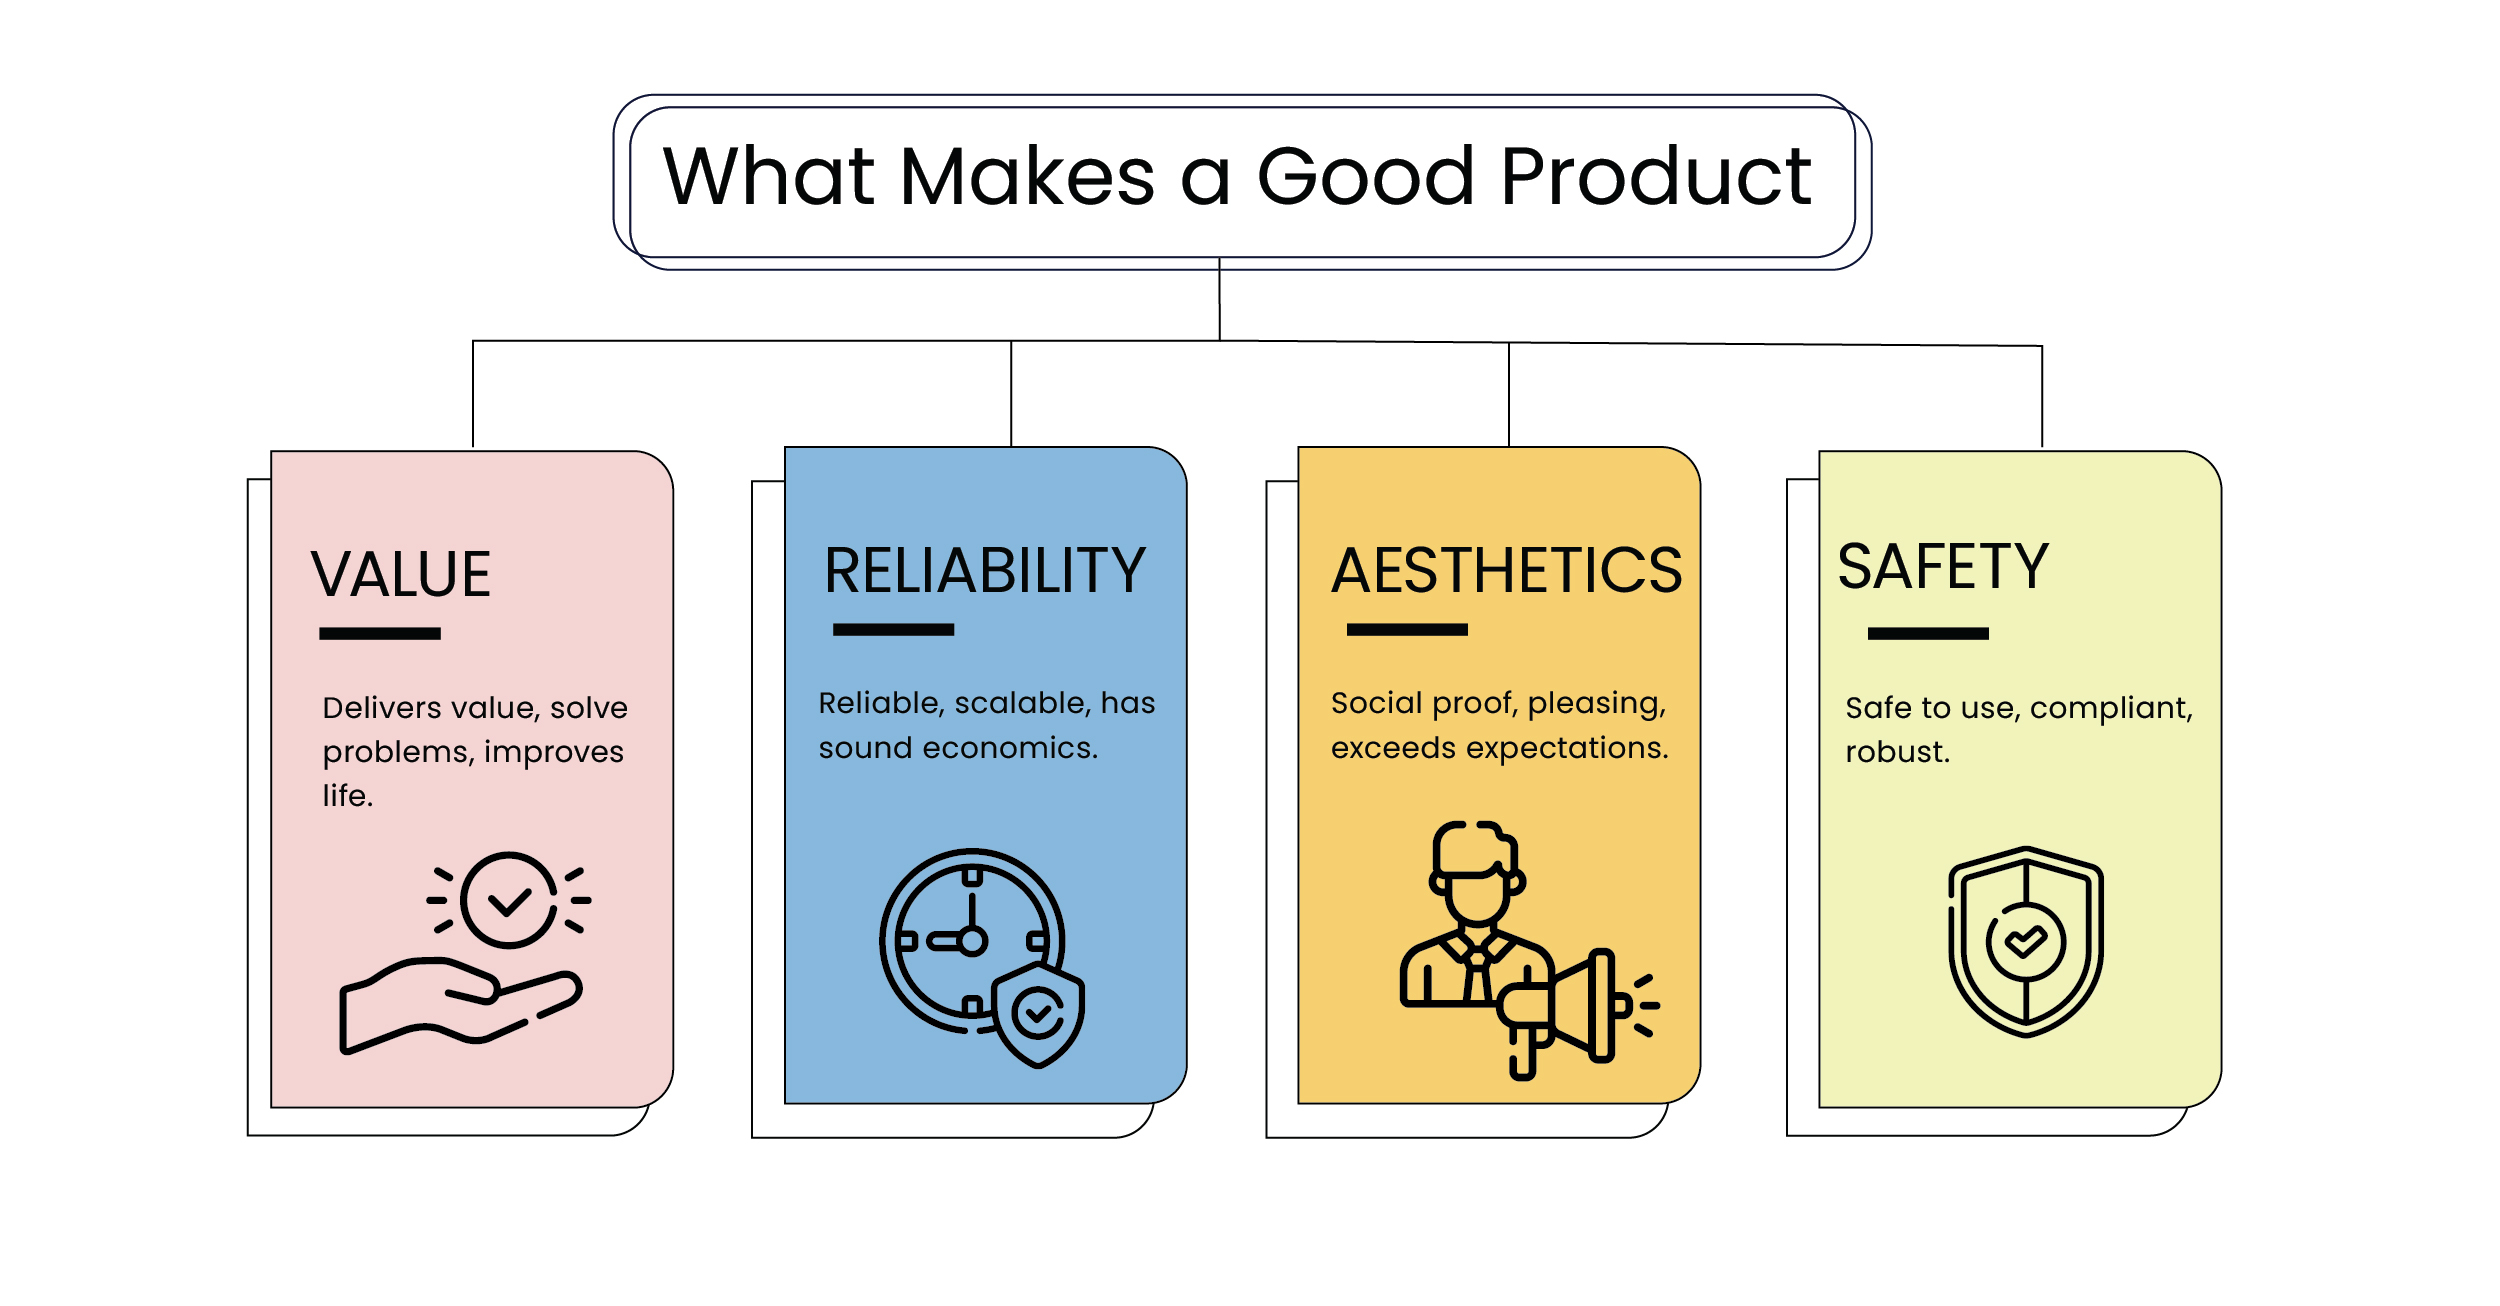 Attributes of good data products - value, reliability, aesthetics, and safety.